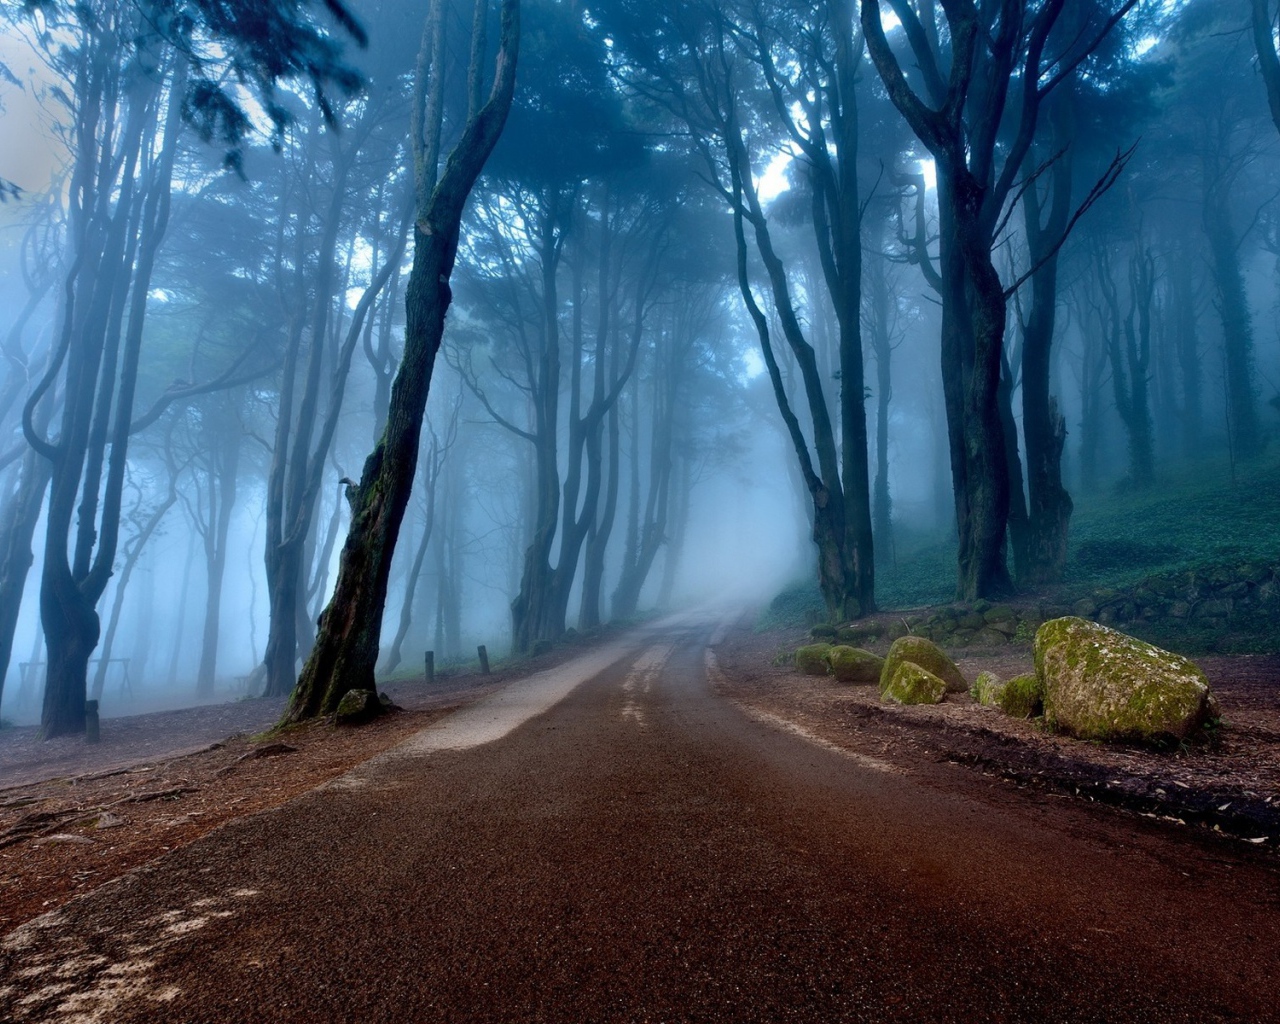 The road in the misty forest, Portugal